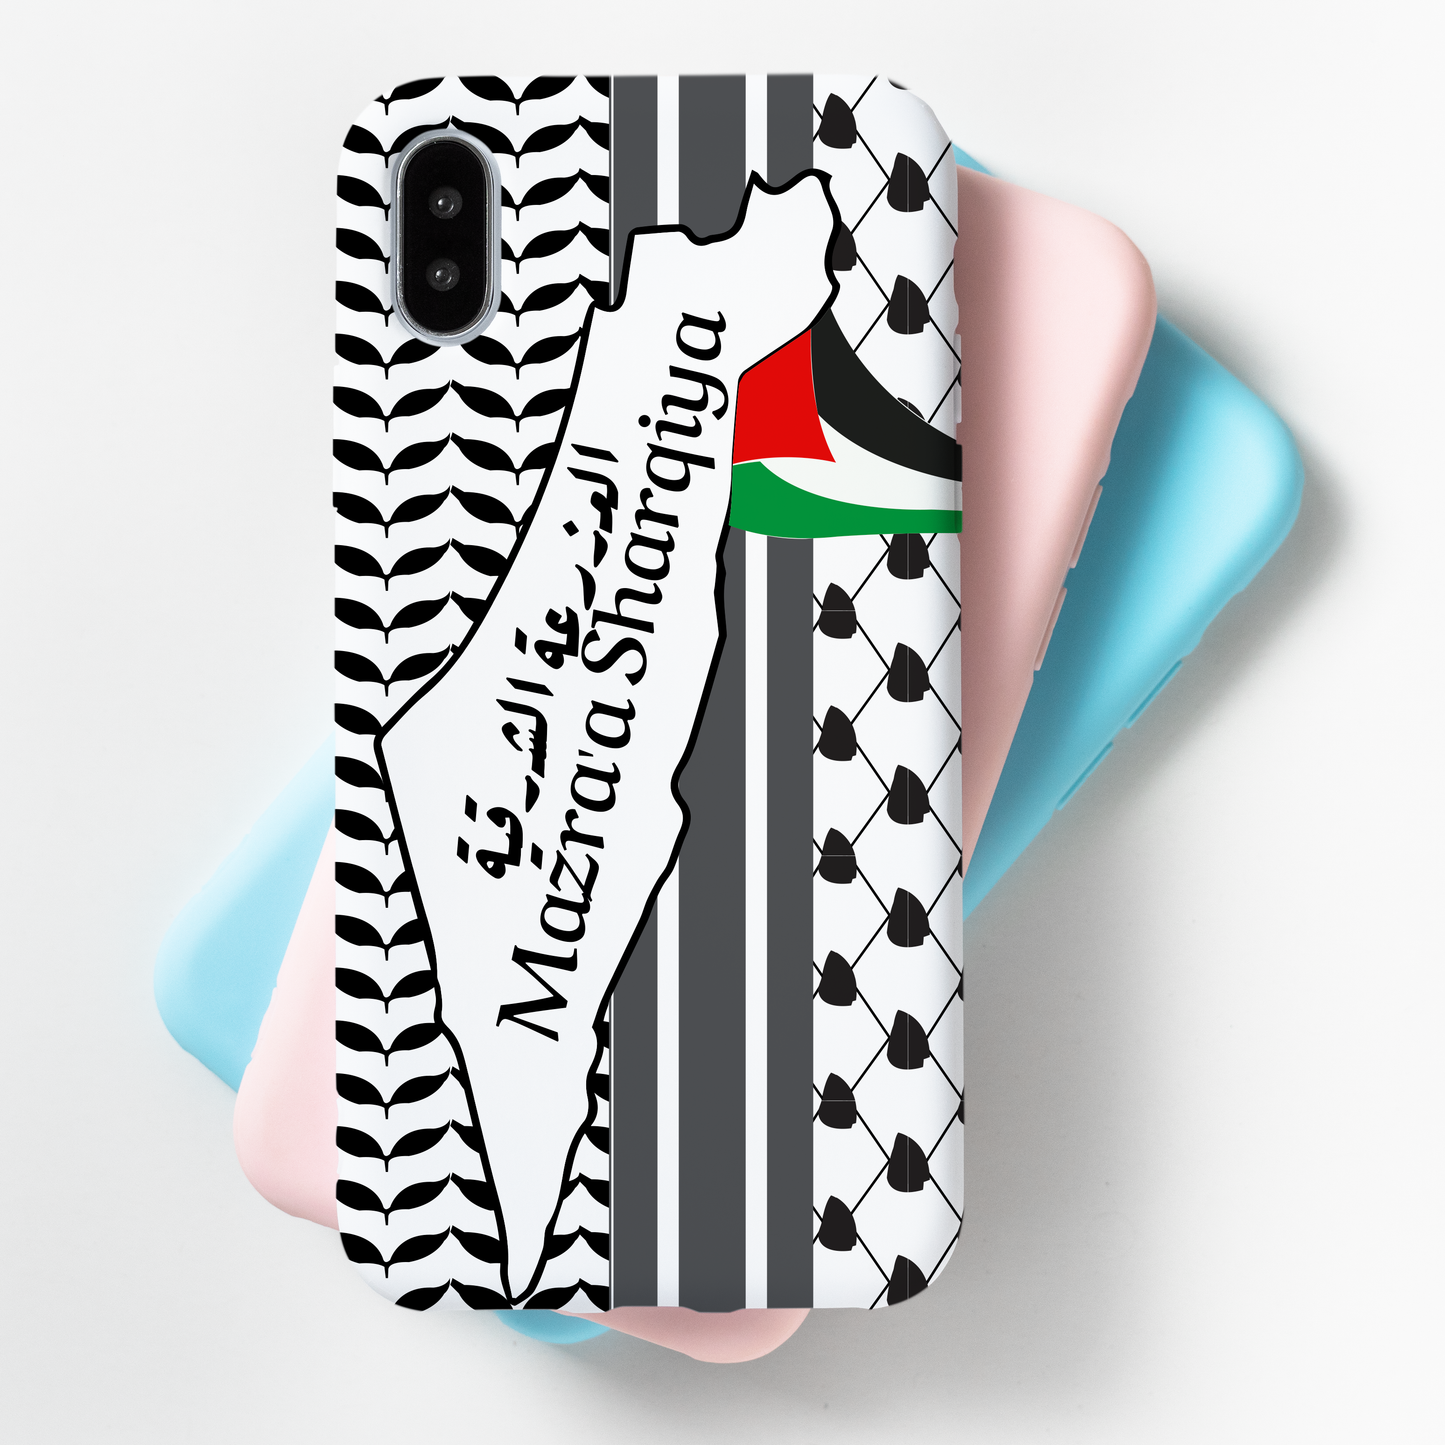 Palestinian Heritage: Artistic Phone Cases